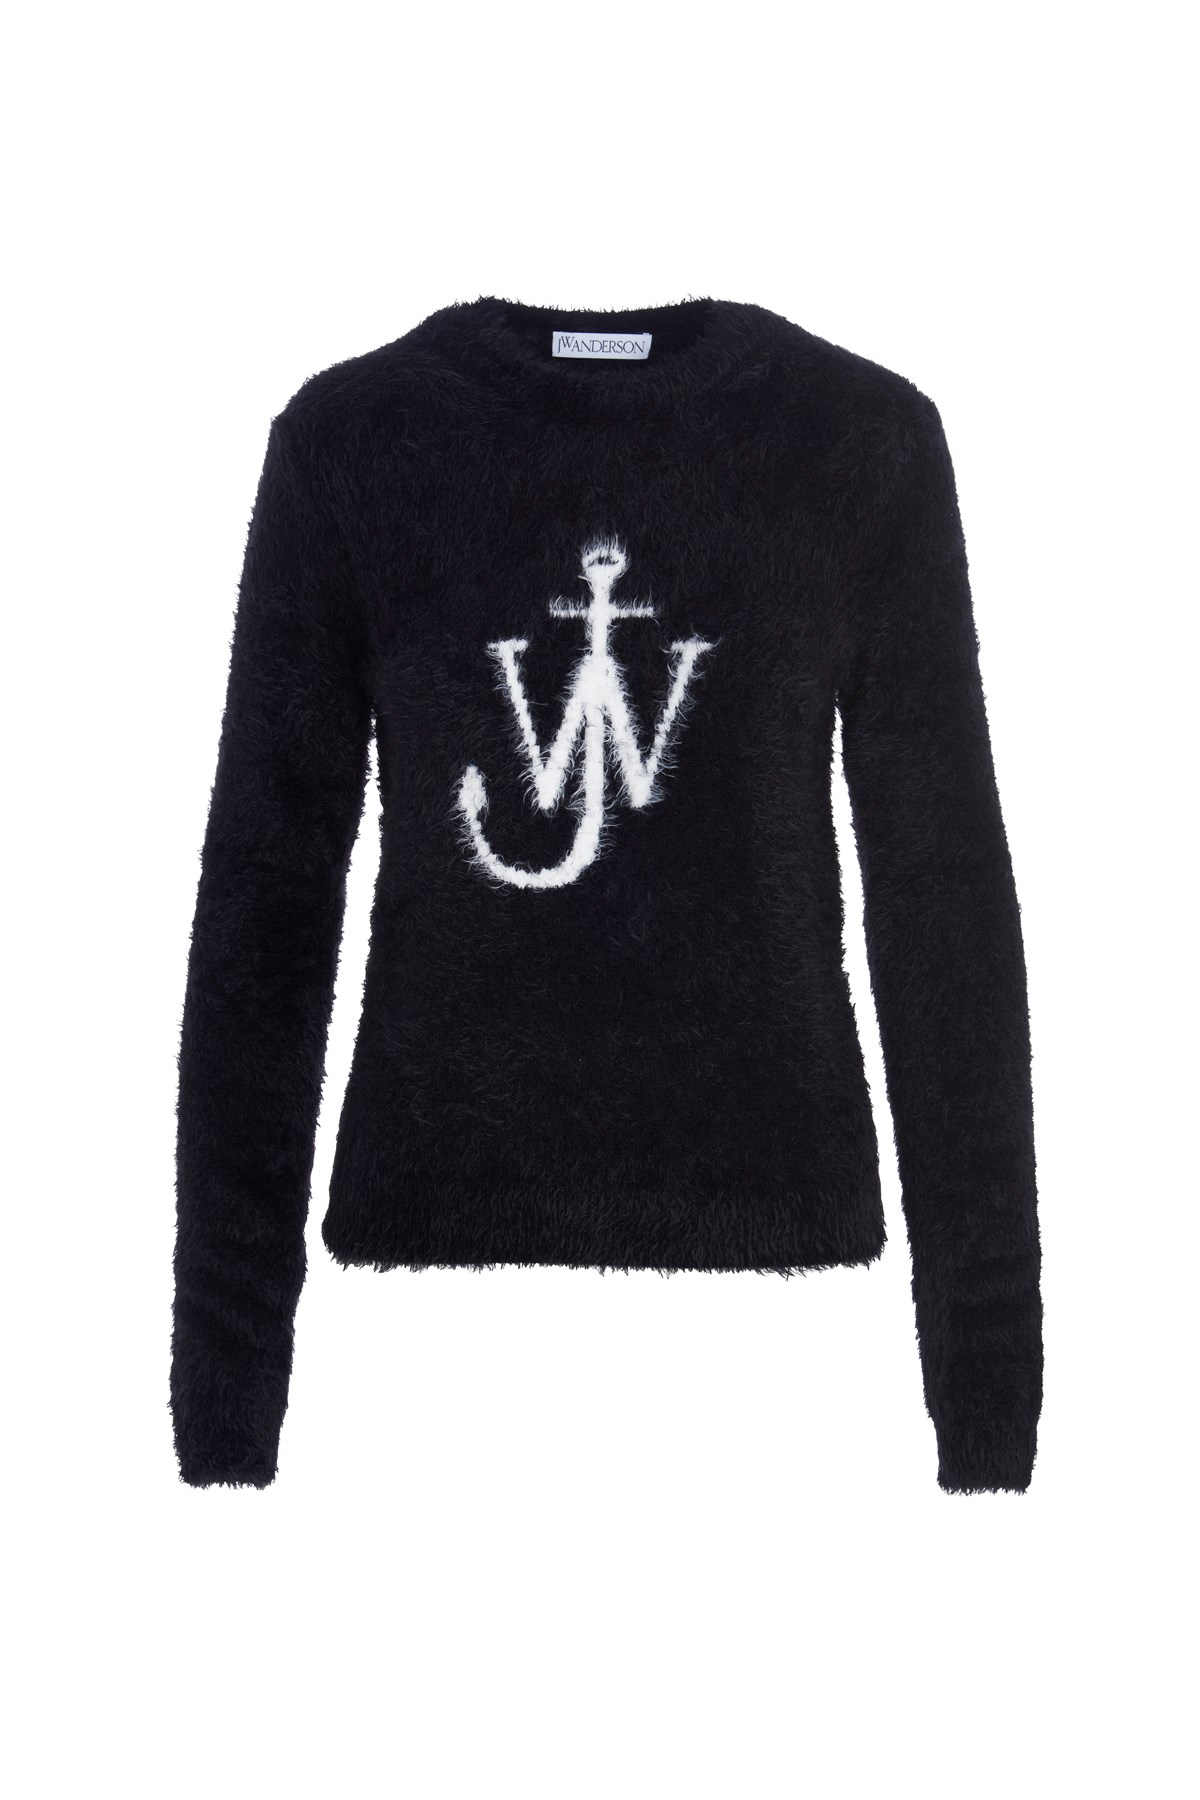 J.W.ANDERSON Pullover 'Anchor‘